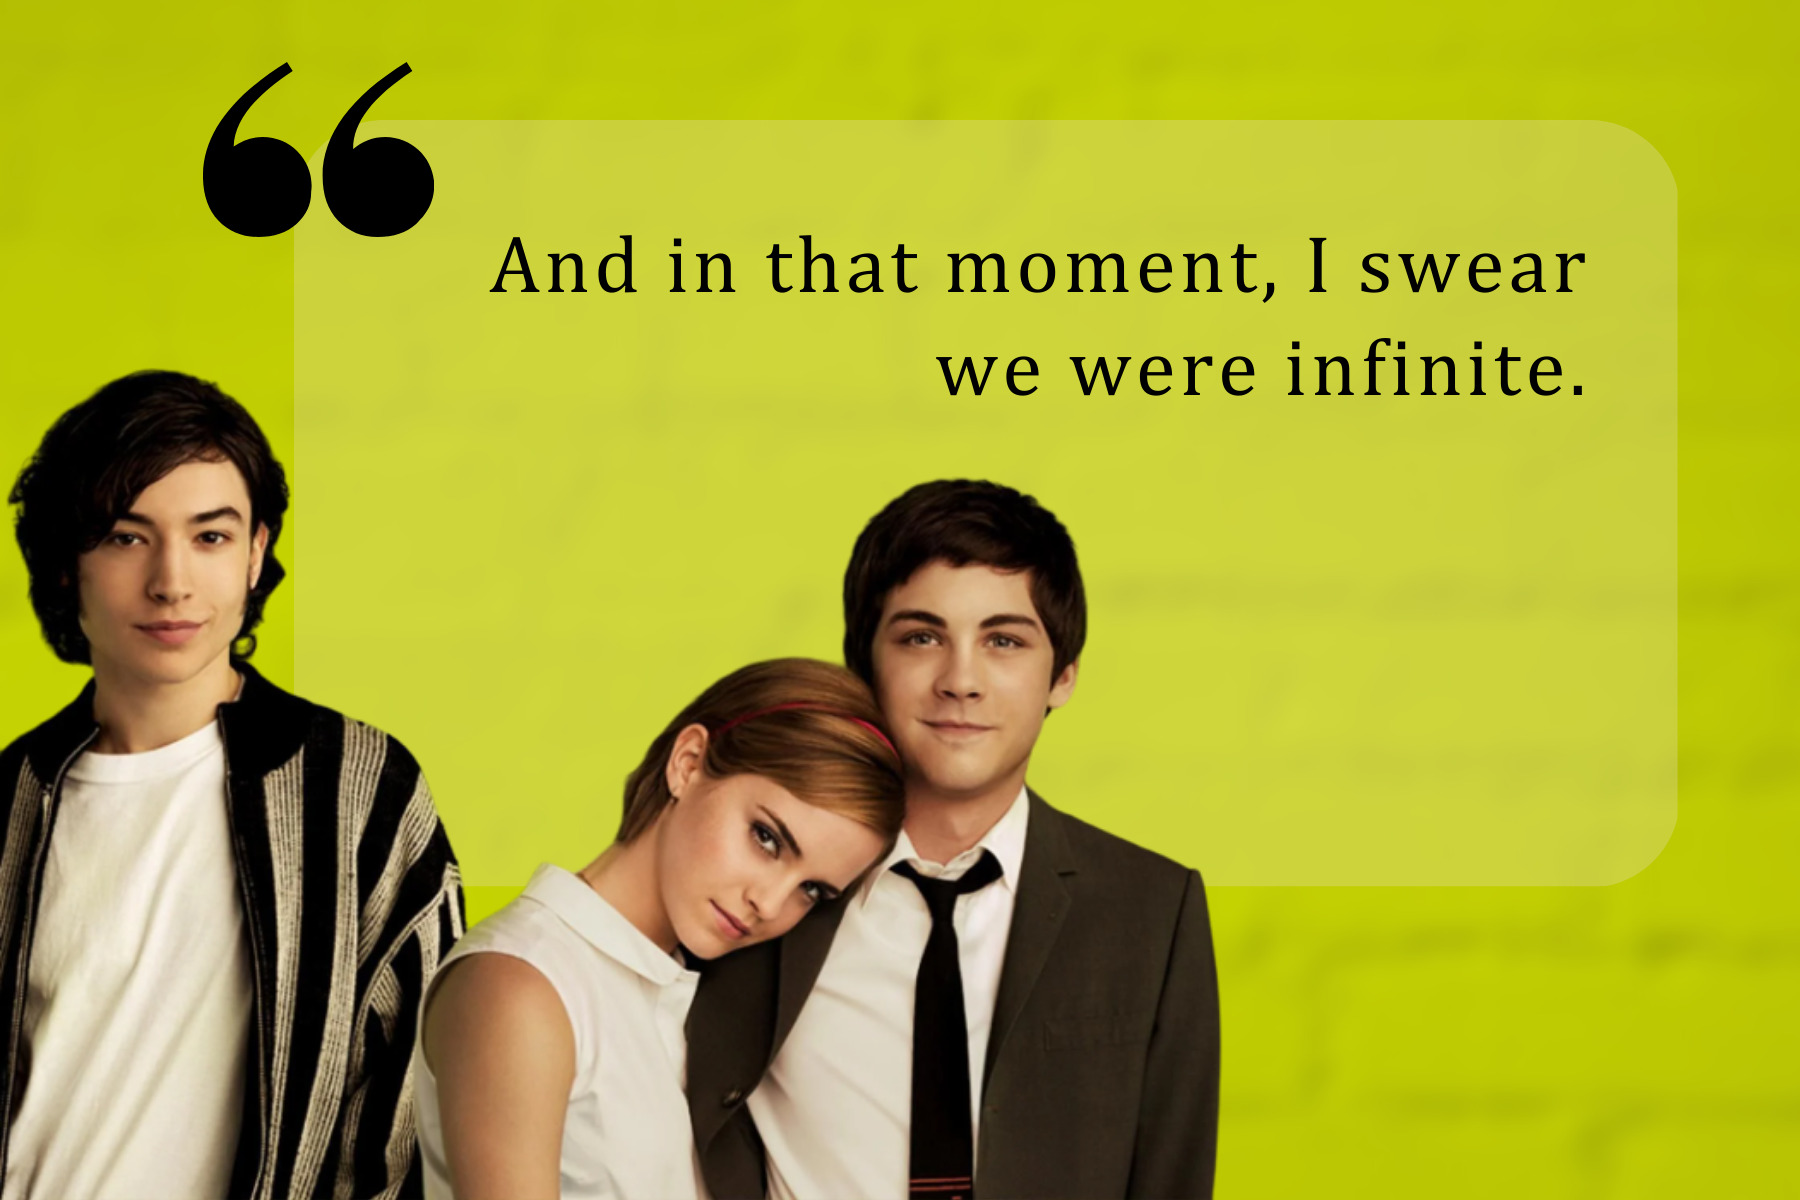 Perks Of Being a wallflower quotes Stephen Chbosky the unvisited